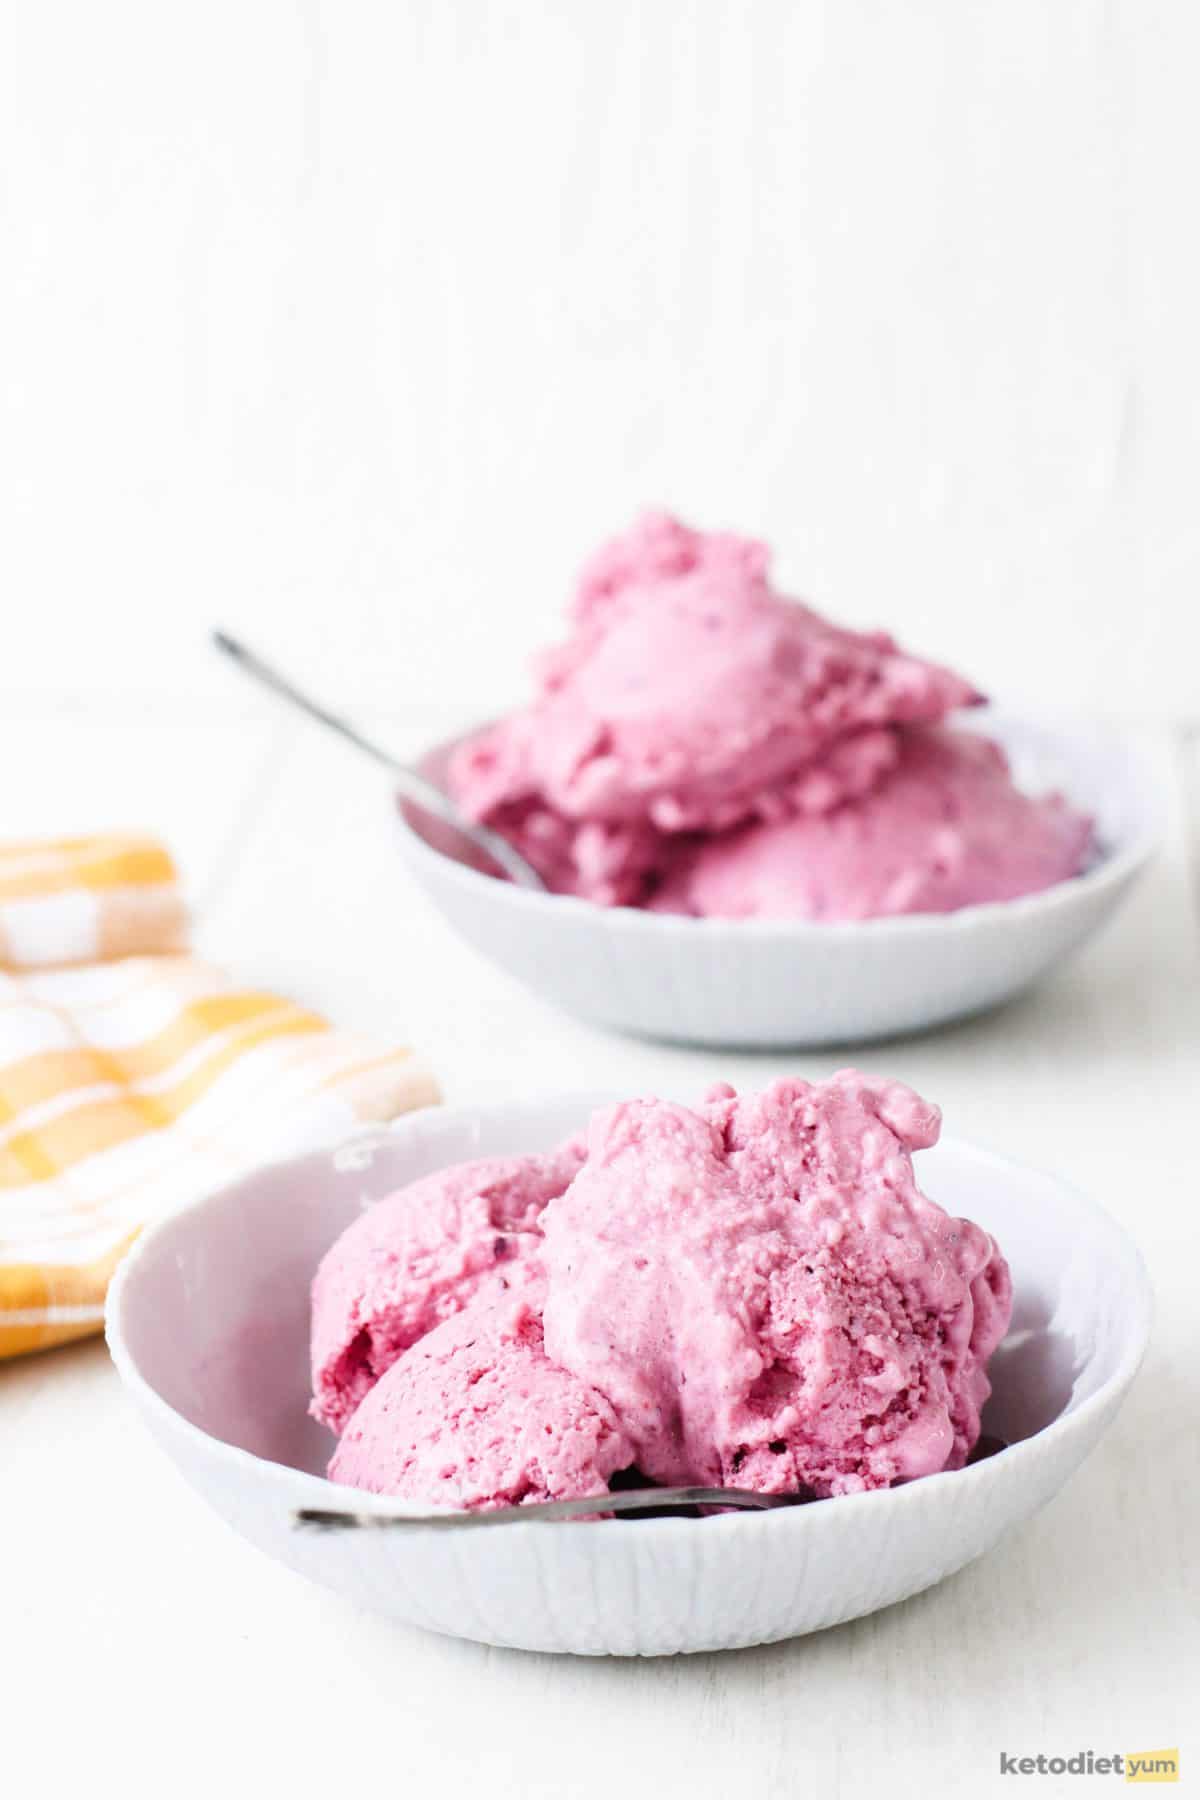 Low carb frozen yogurt made with Greek yogurt served in a white bowl